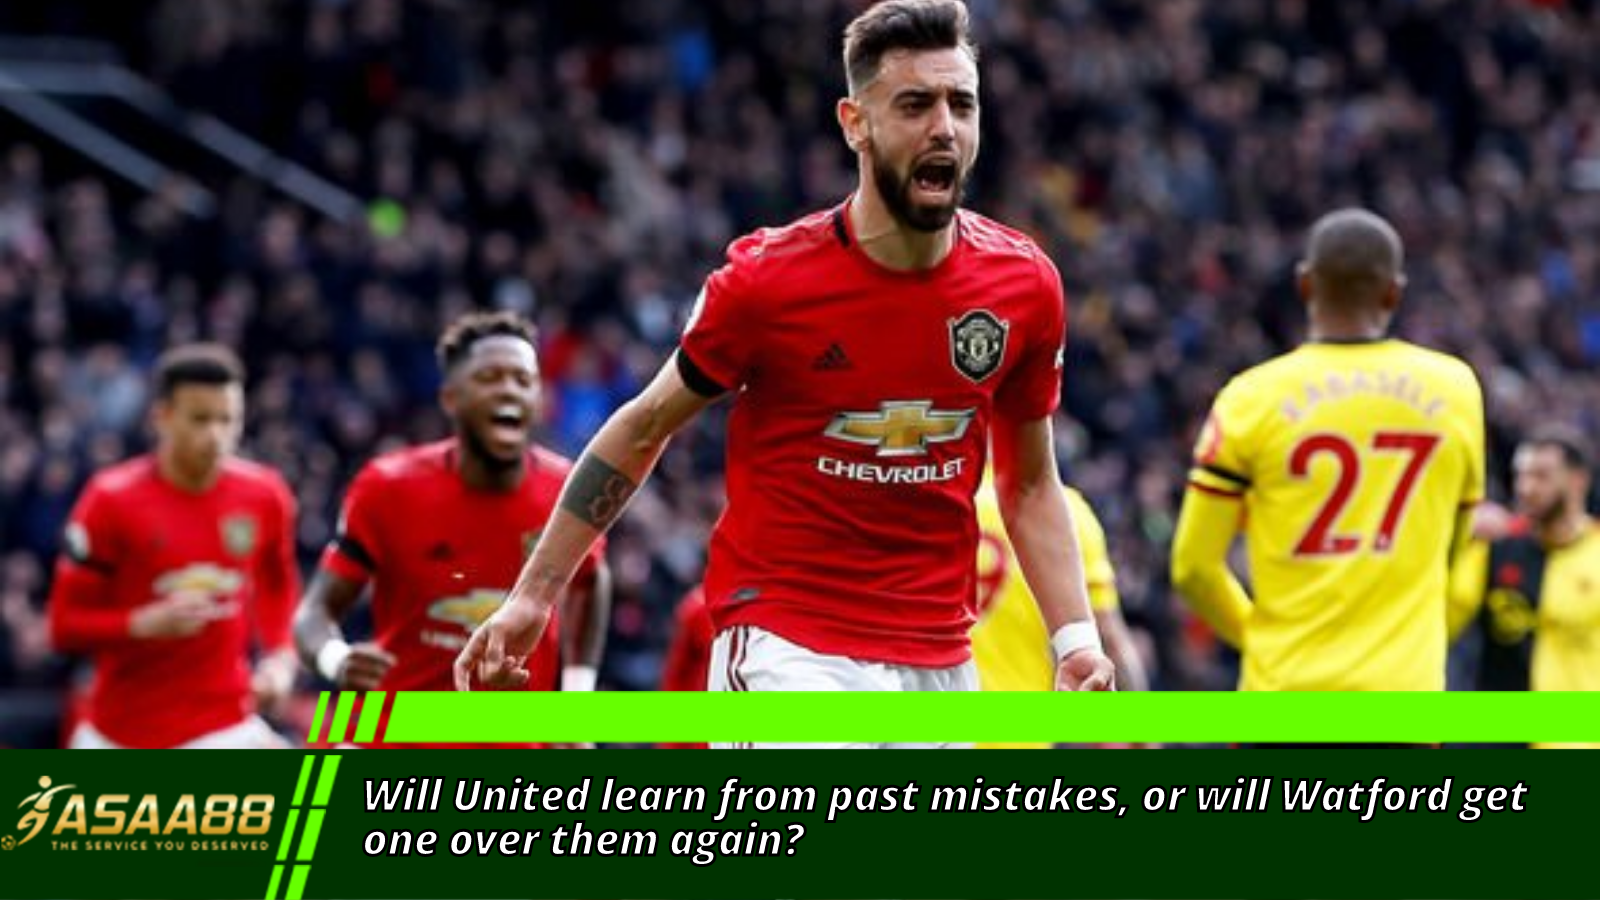 Will United learn from past mistakes, or will Watford get one over them again?